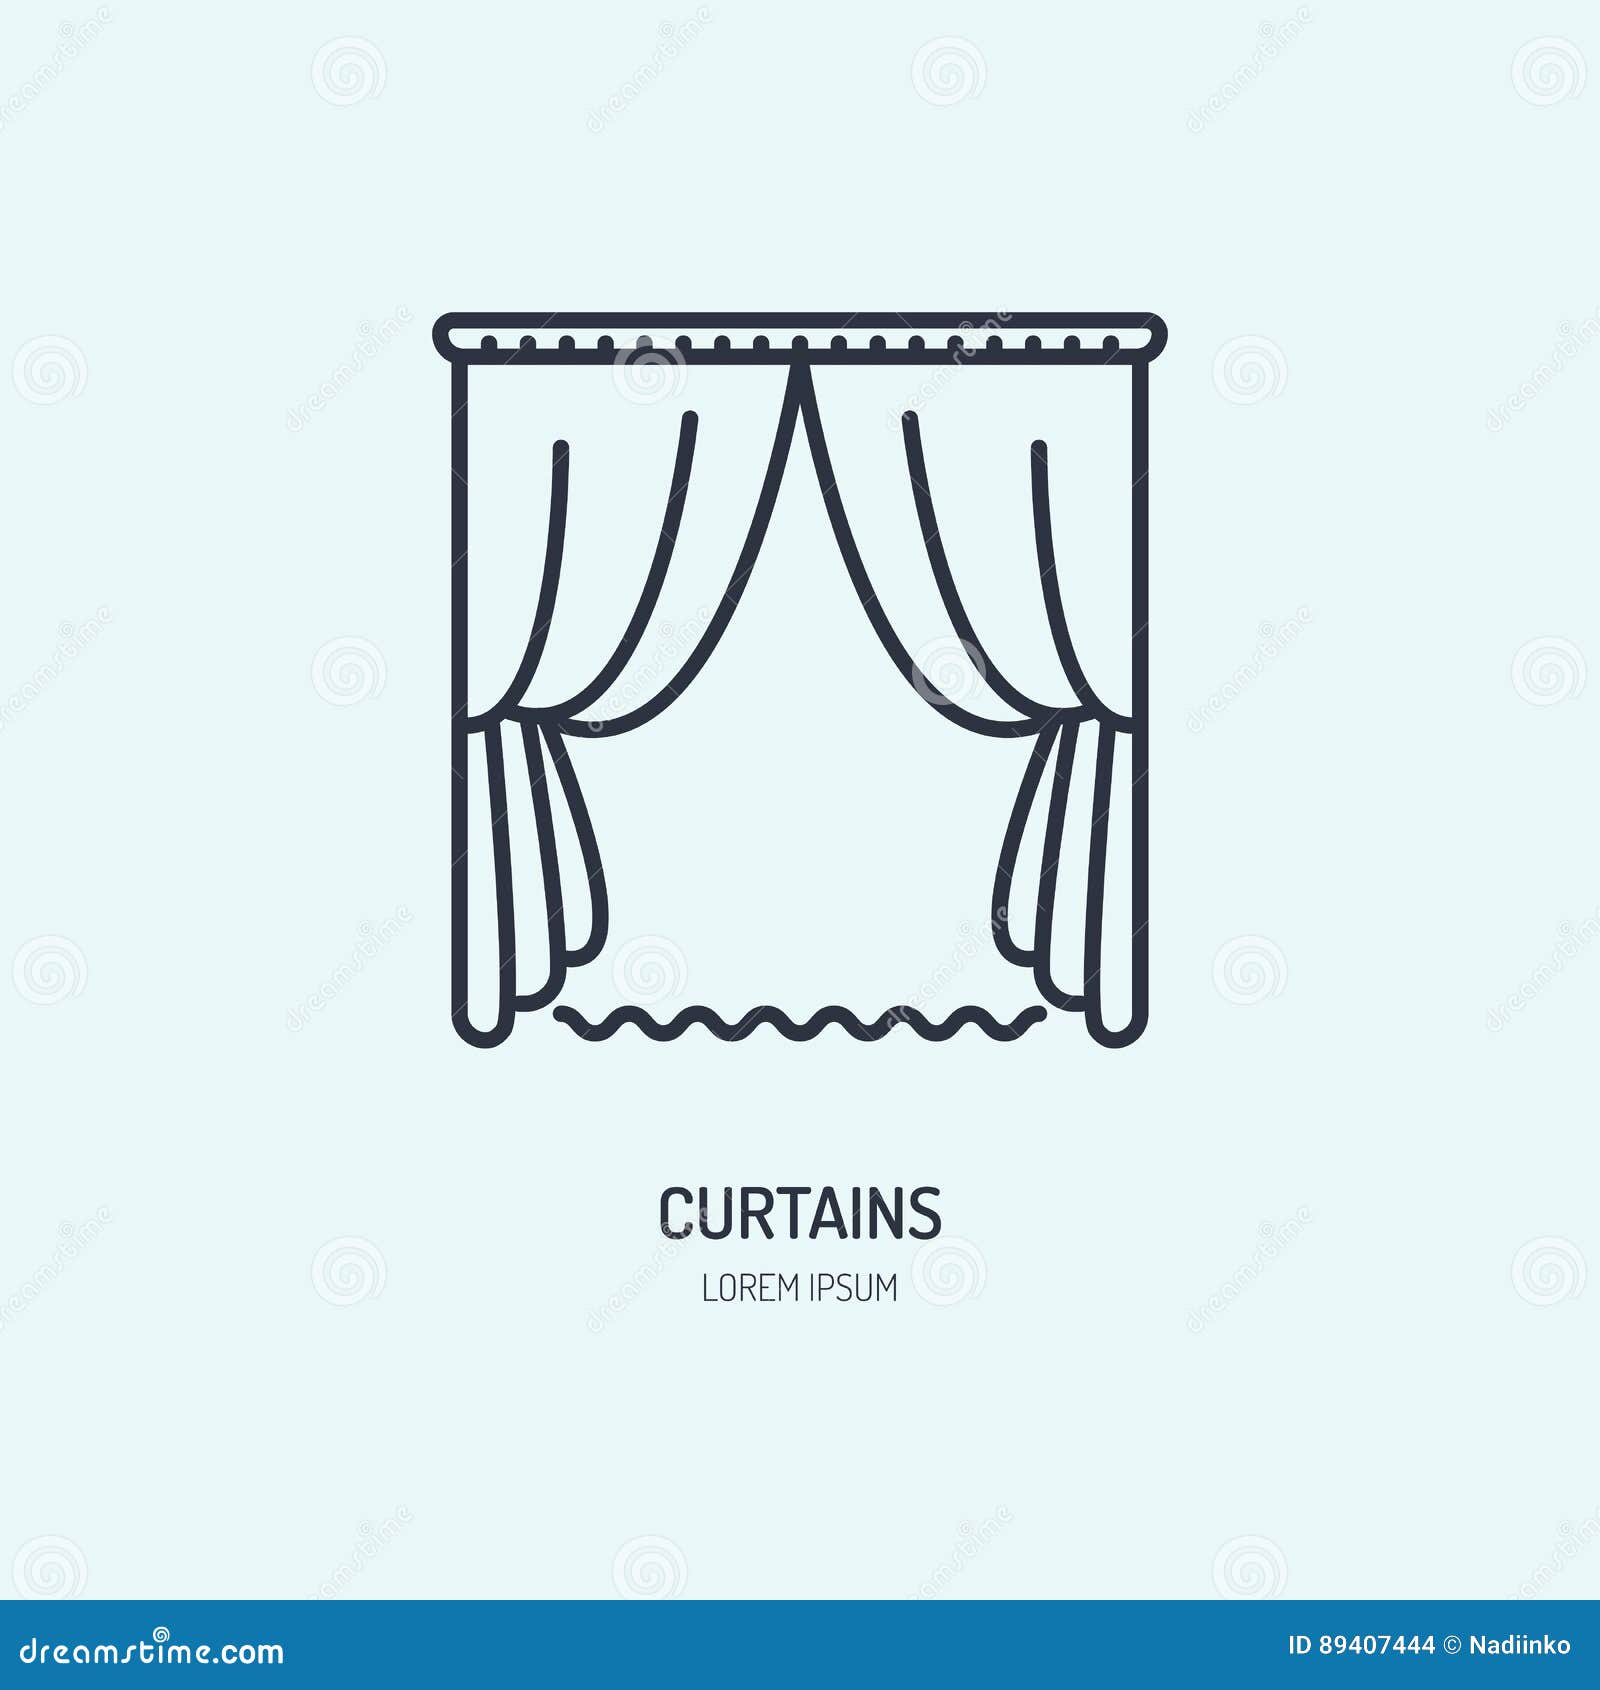 Letter decor on the linen panel Logo textile restaurant. Print curtain Monogram for linen curtain Customizing textiles Signs for home